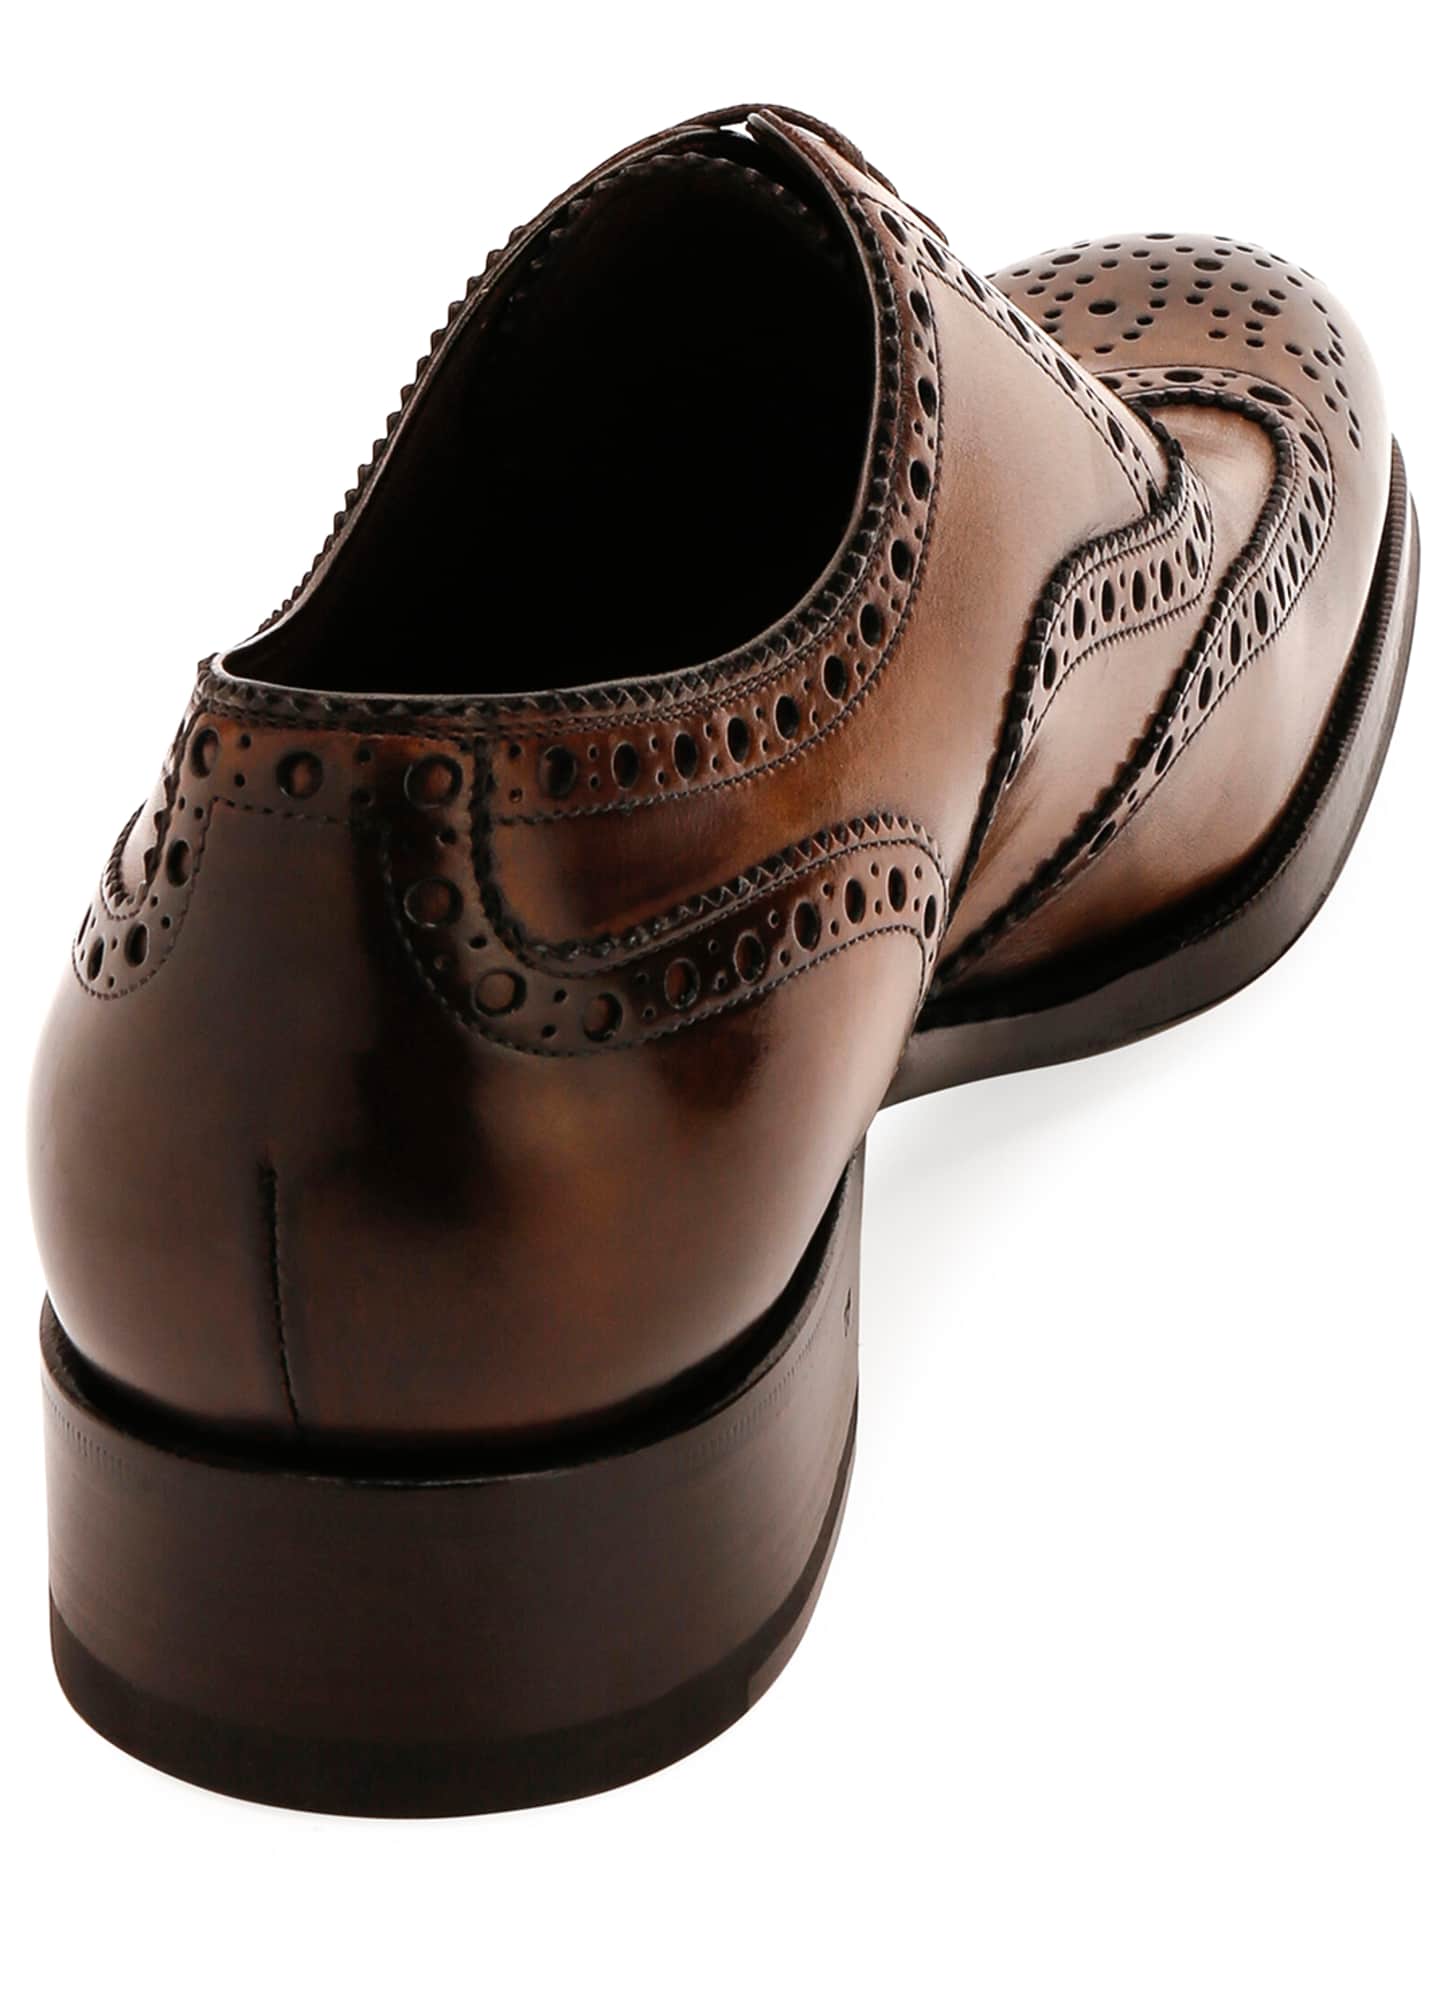 TOM FORD Men's Dress Shoes With Detailing - Bergdorf Goodman